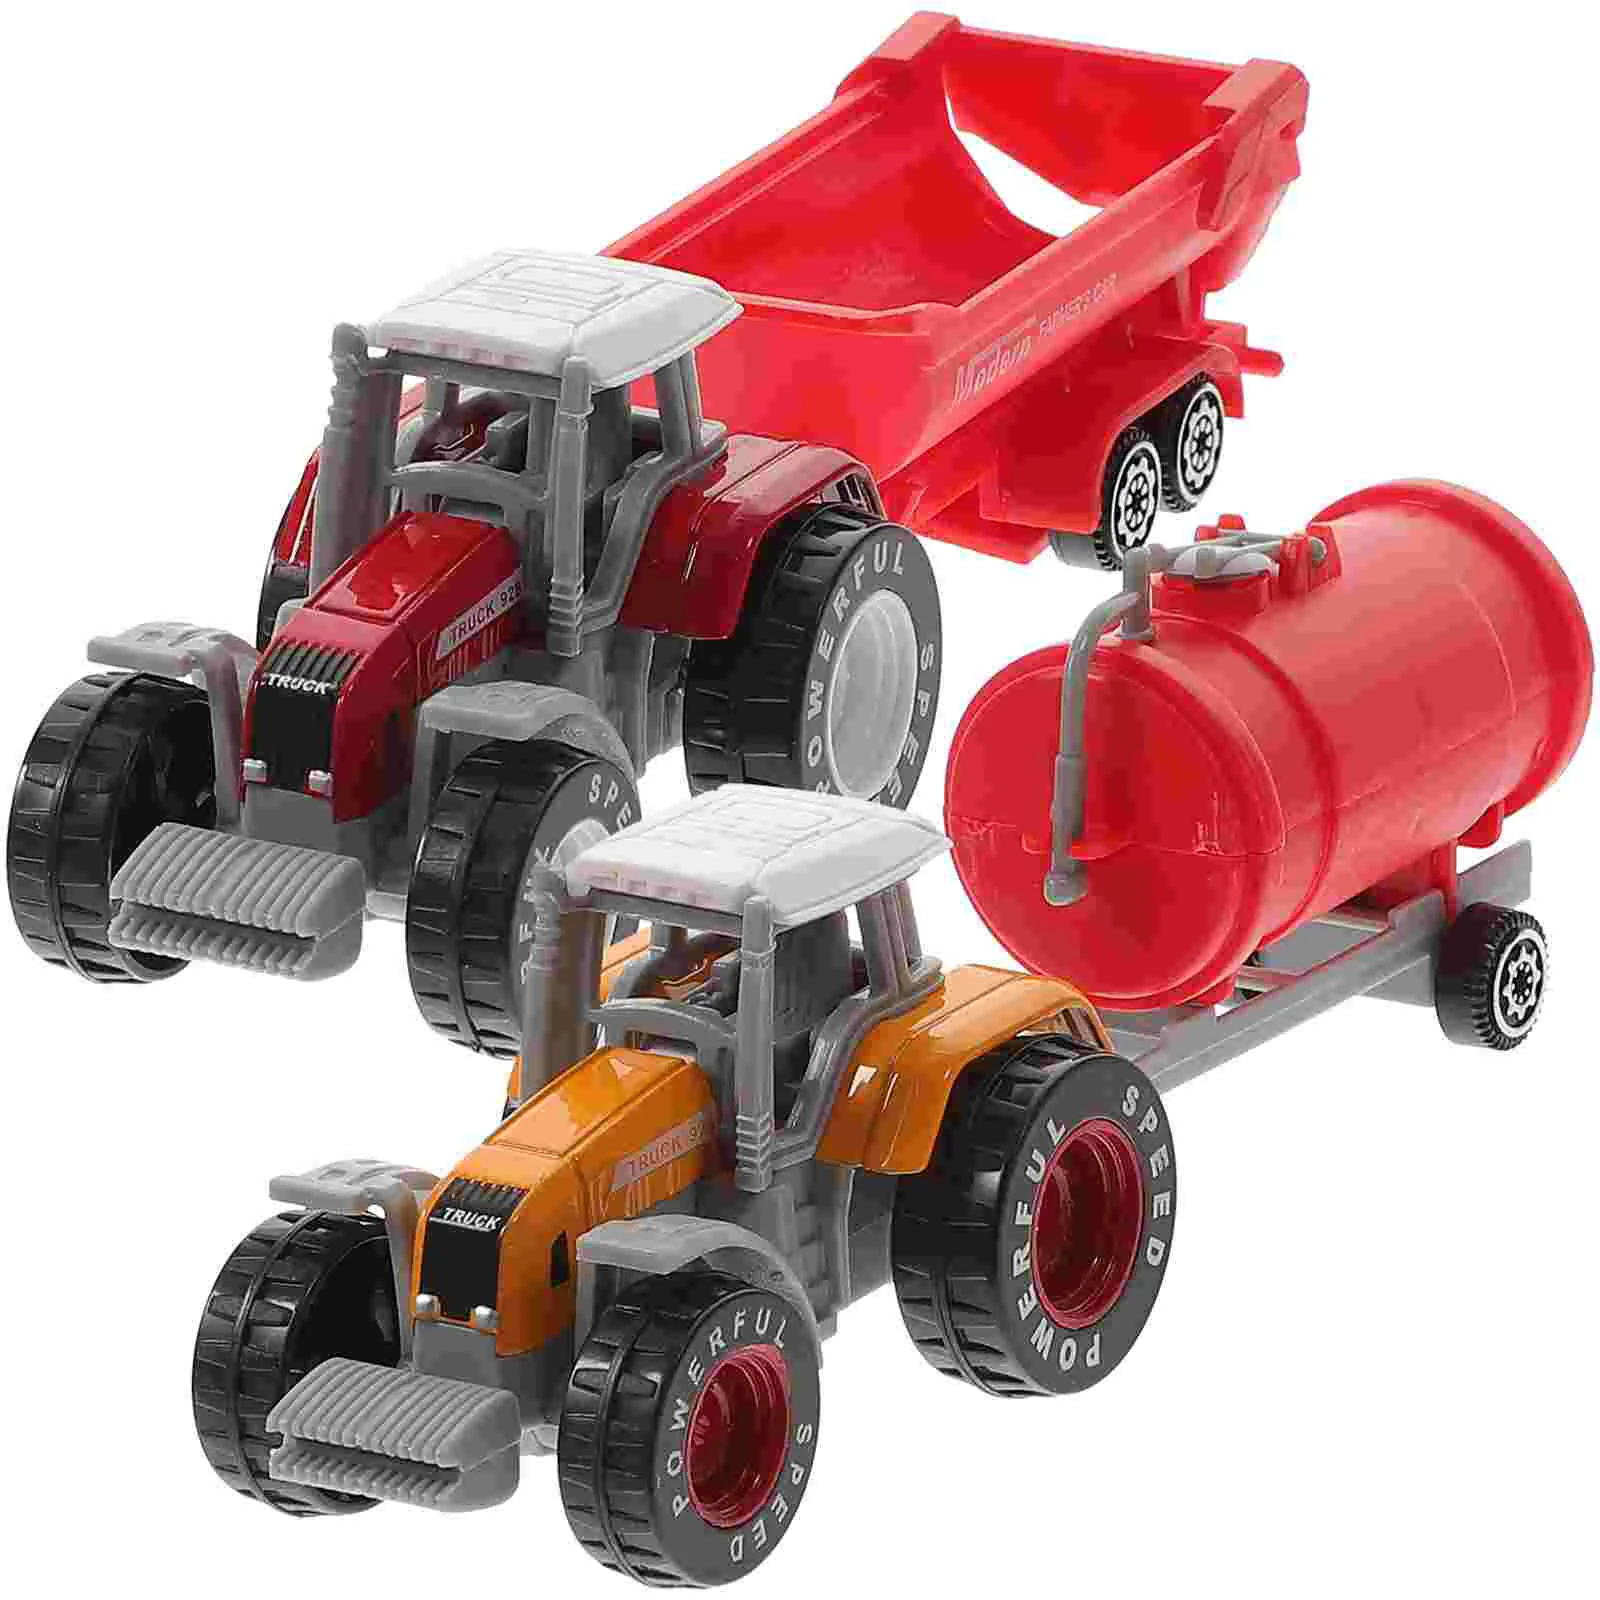 

2 Pcs Farm Cart Toy Boys Truck Model Engineering Kids Cognitive Tractor Container Baby Plastic Lifelike